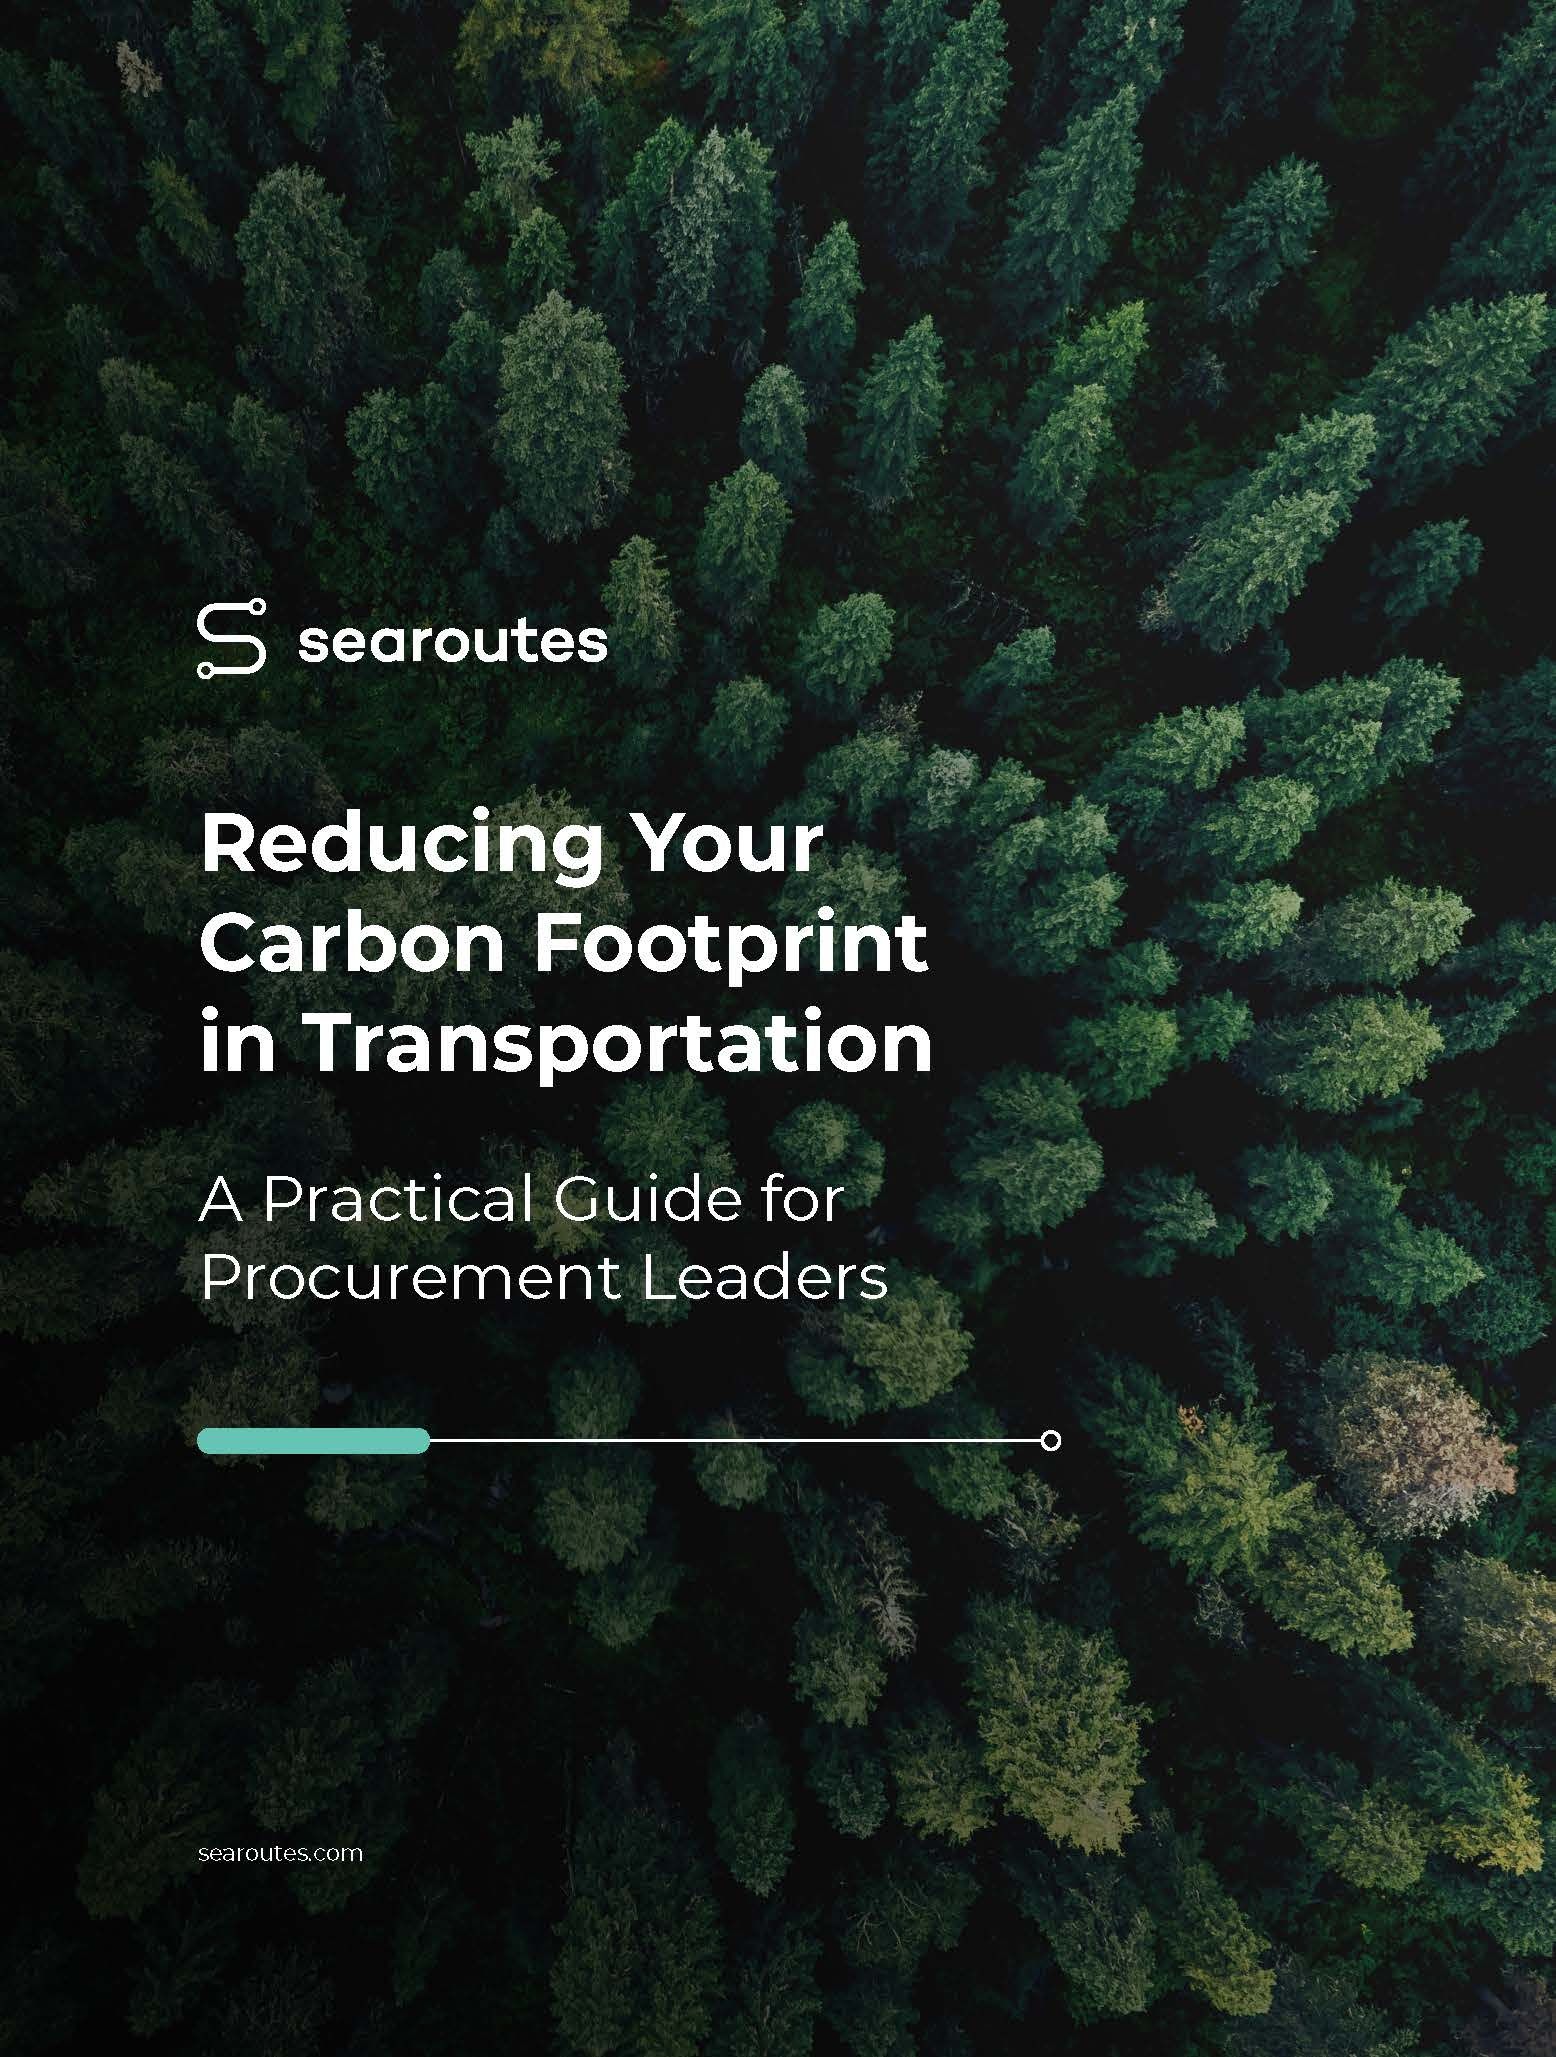 Searoutes WP Reducing your Carbon Footprint in Transportation - a practical guide for Procurement lead_Page_01